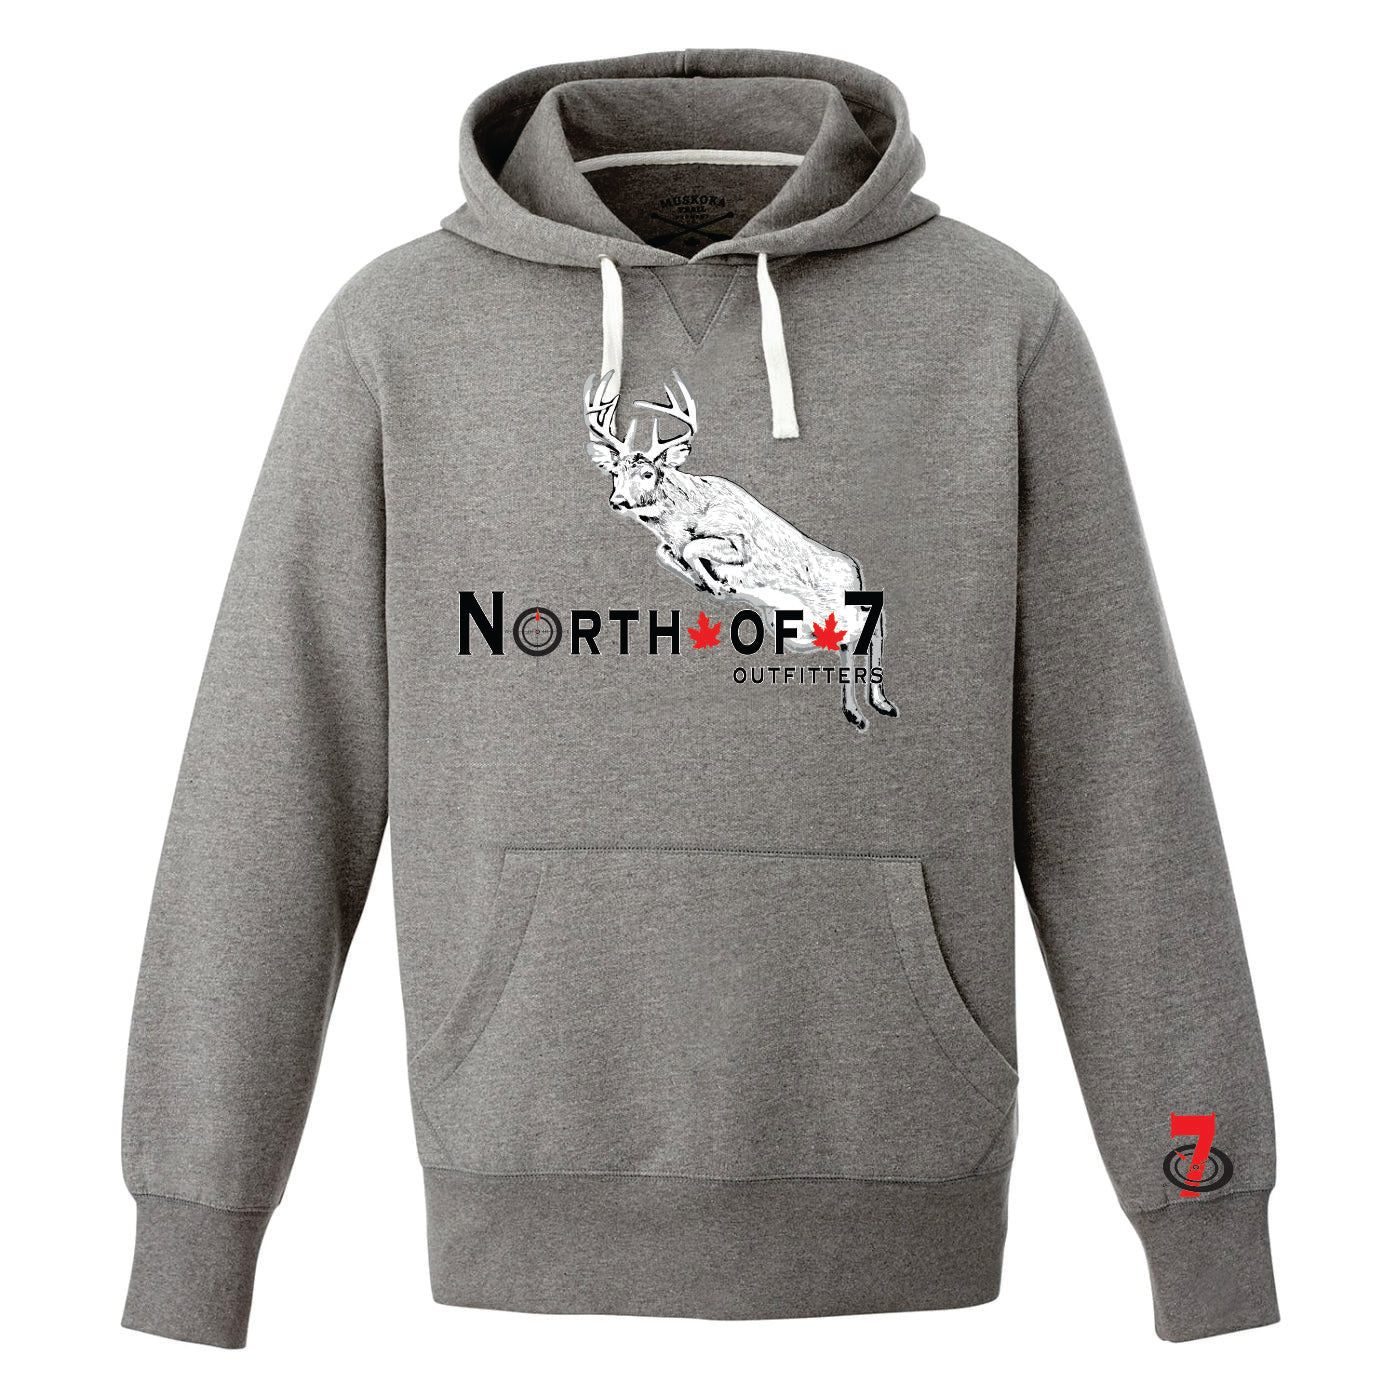 North of 7 Outfitters Women's Deer Pullover Hoodie